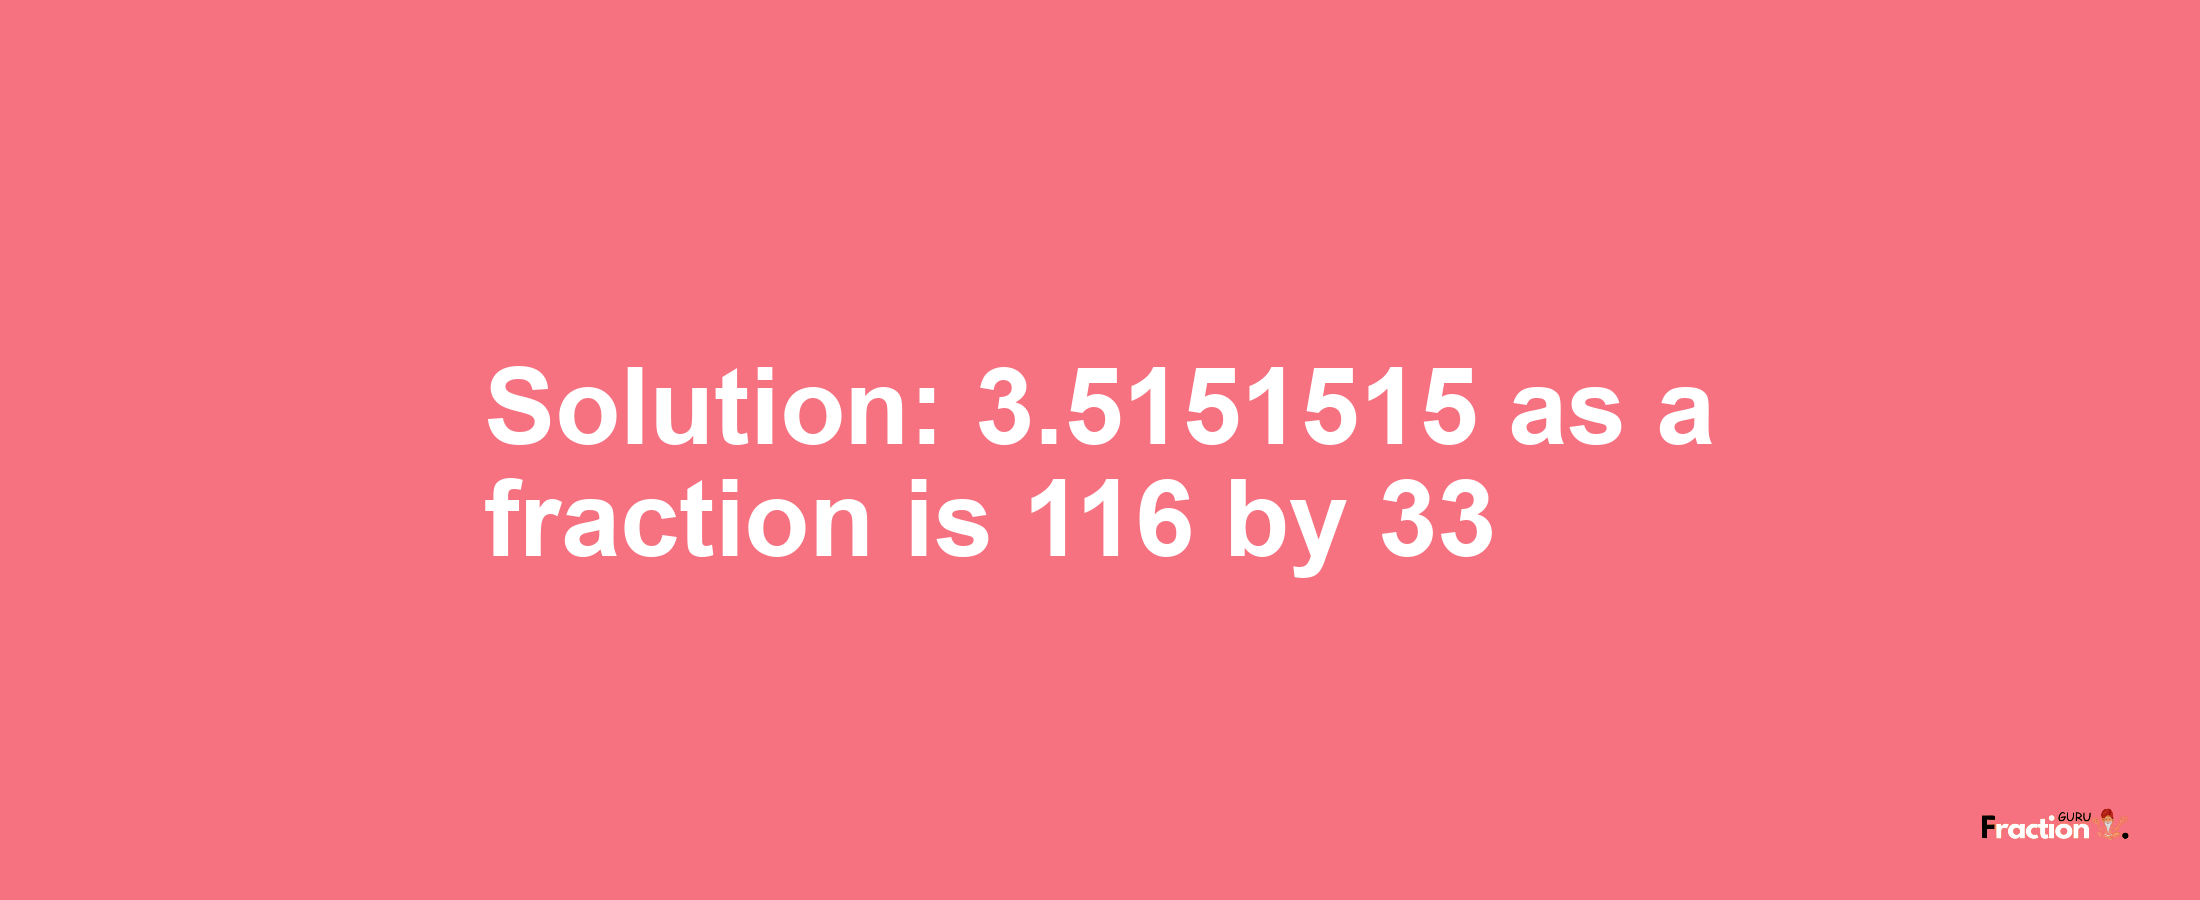 Solution:3.5151515 as a fraction is 116/33